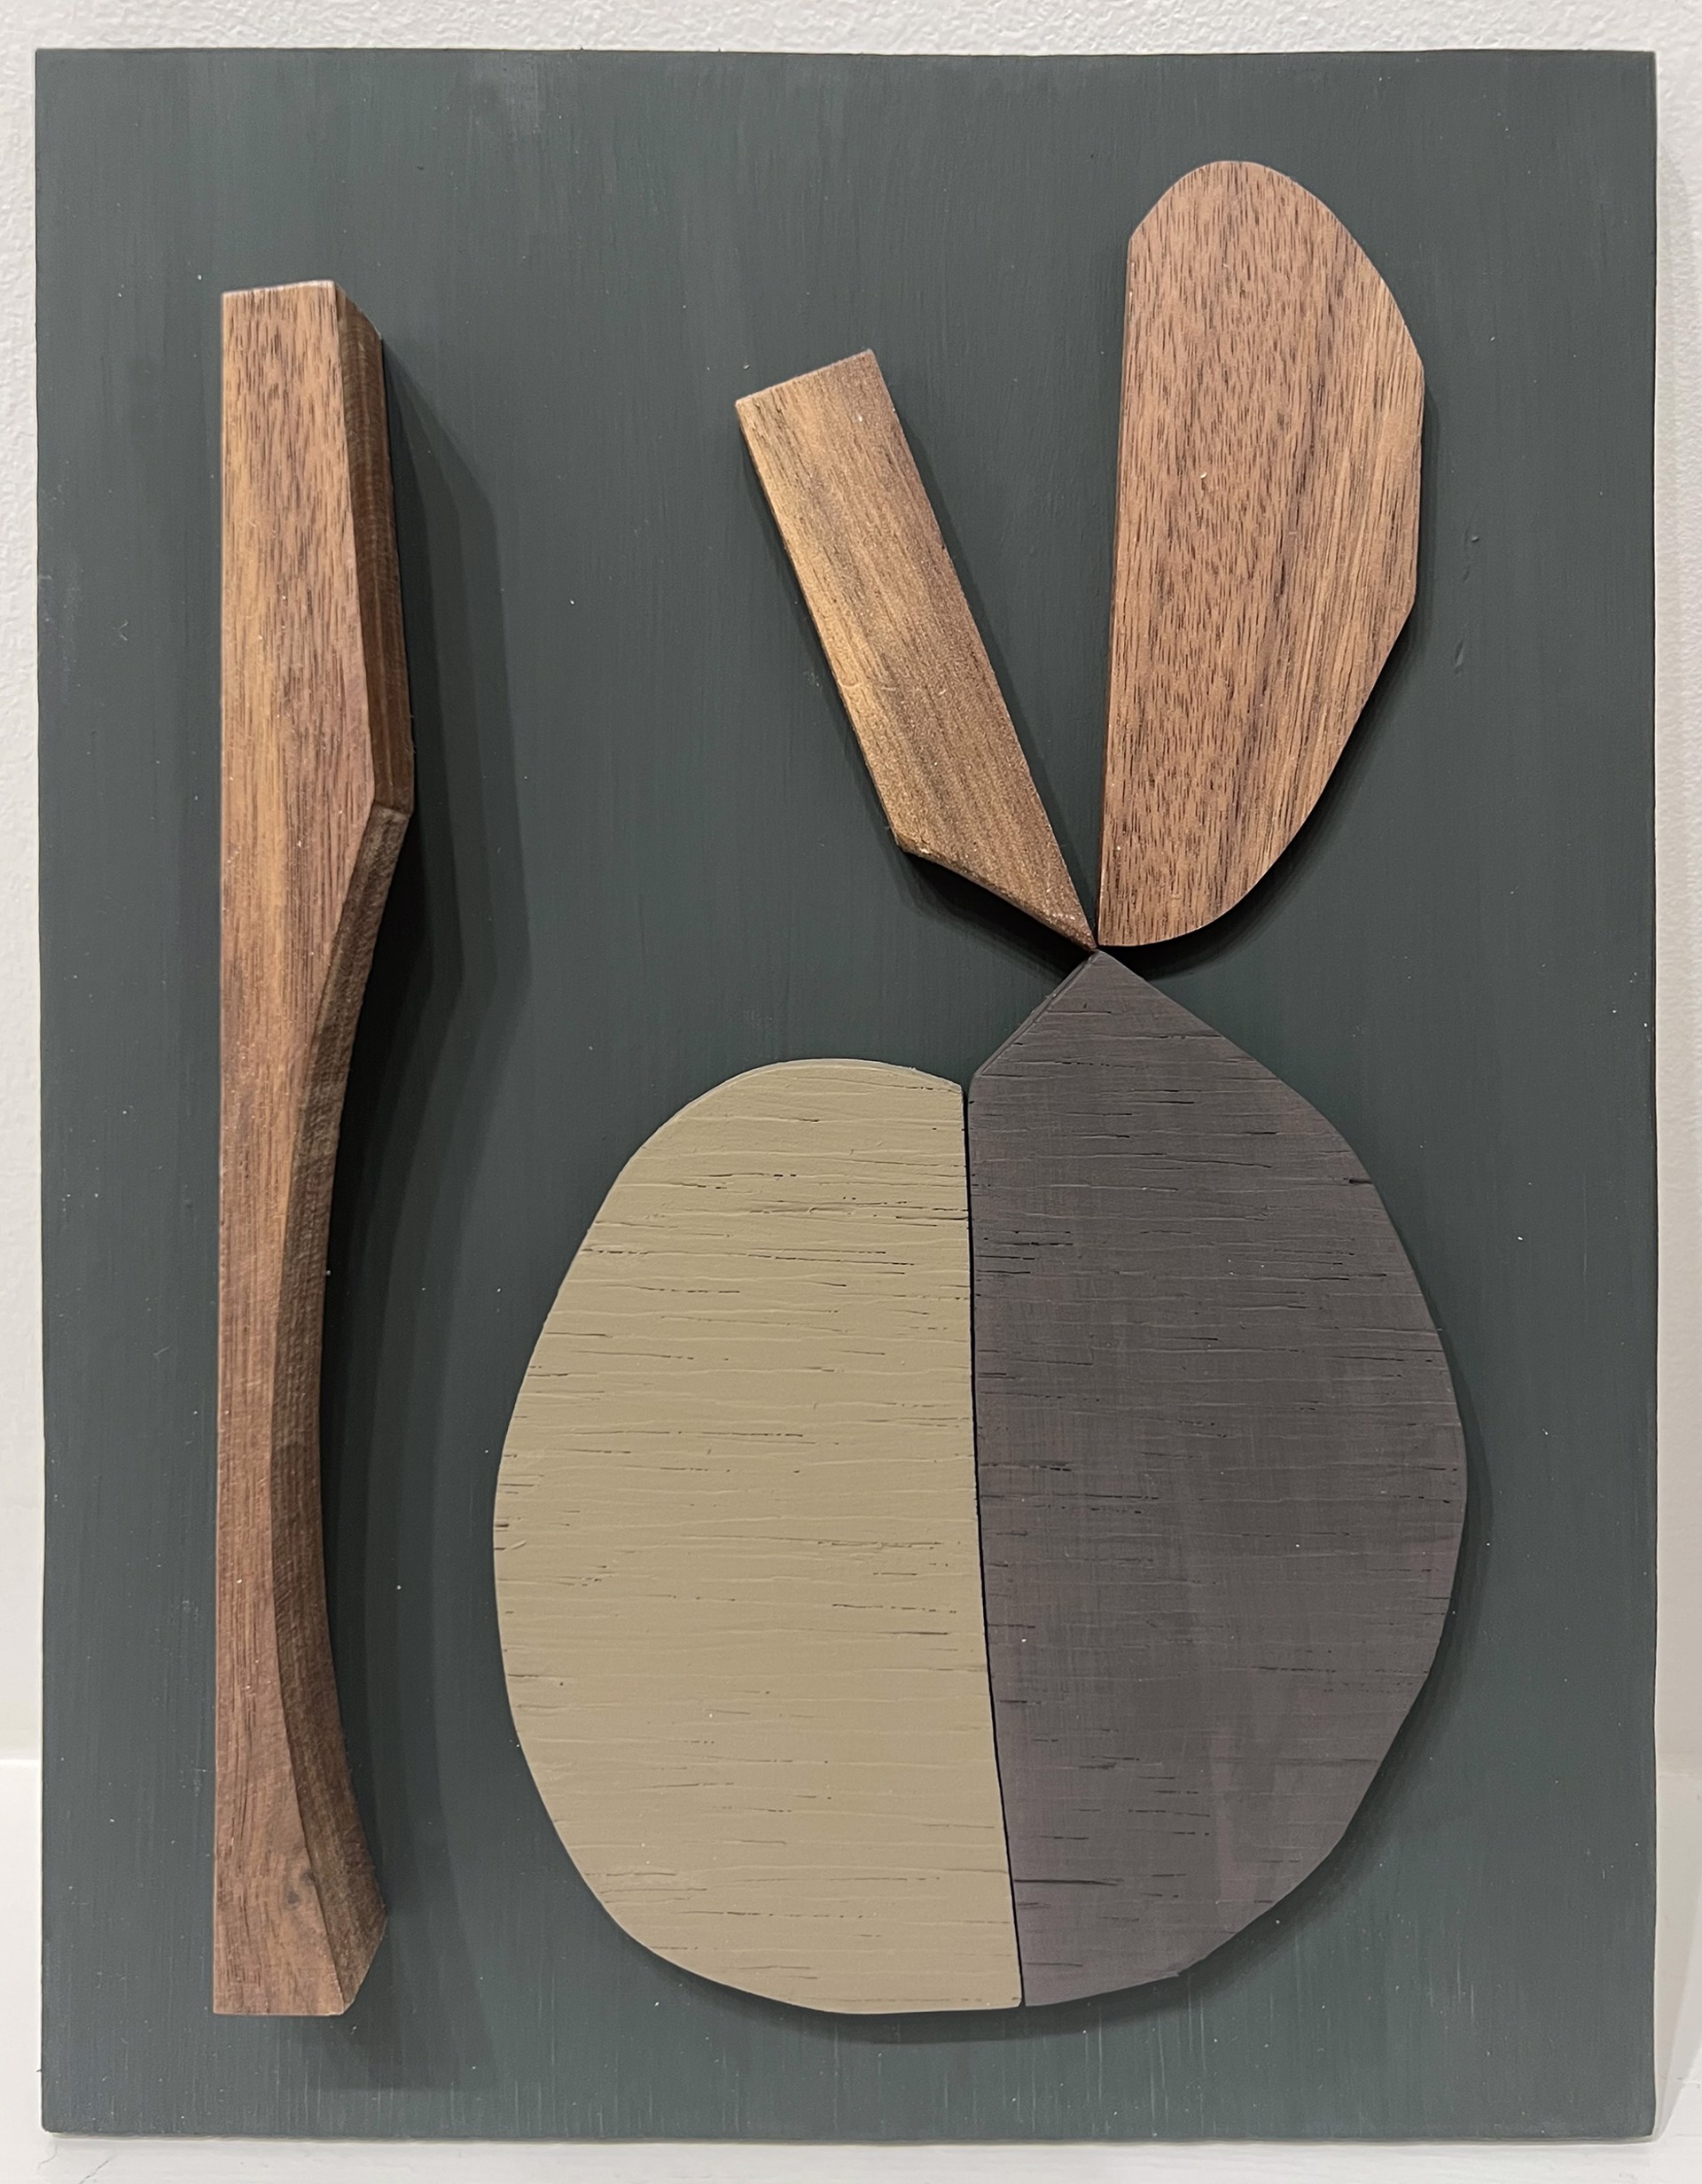 Wood Collage No. 1 by Susan Hable